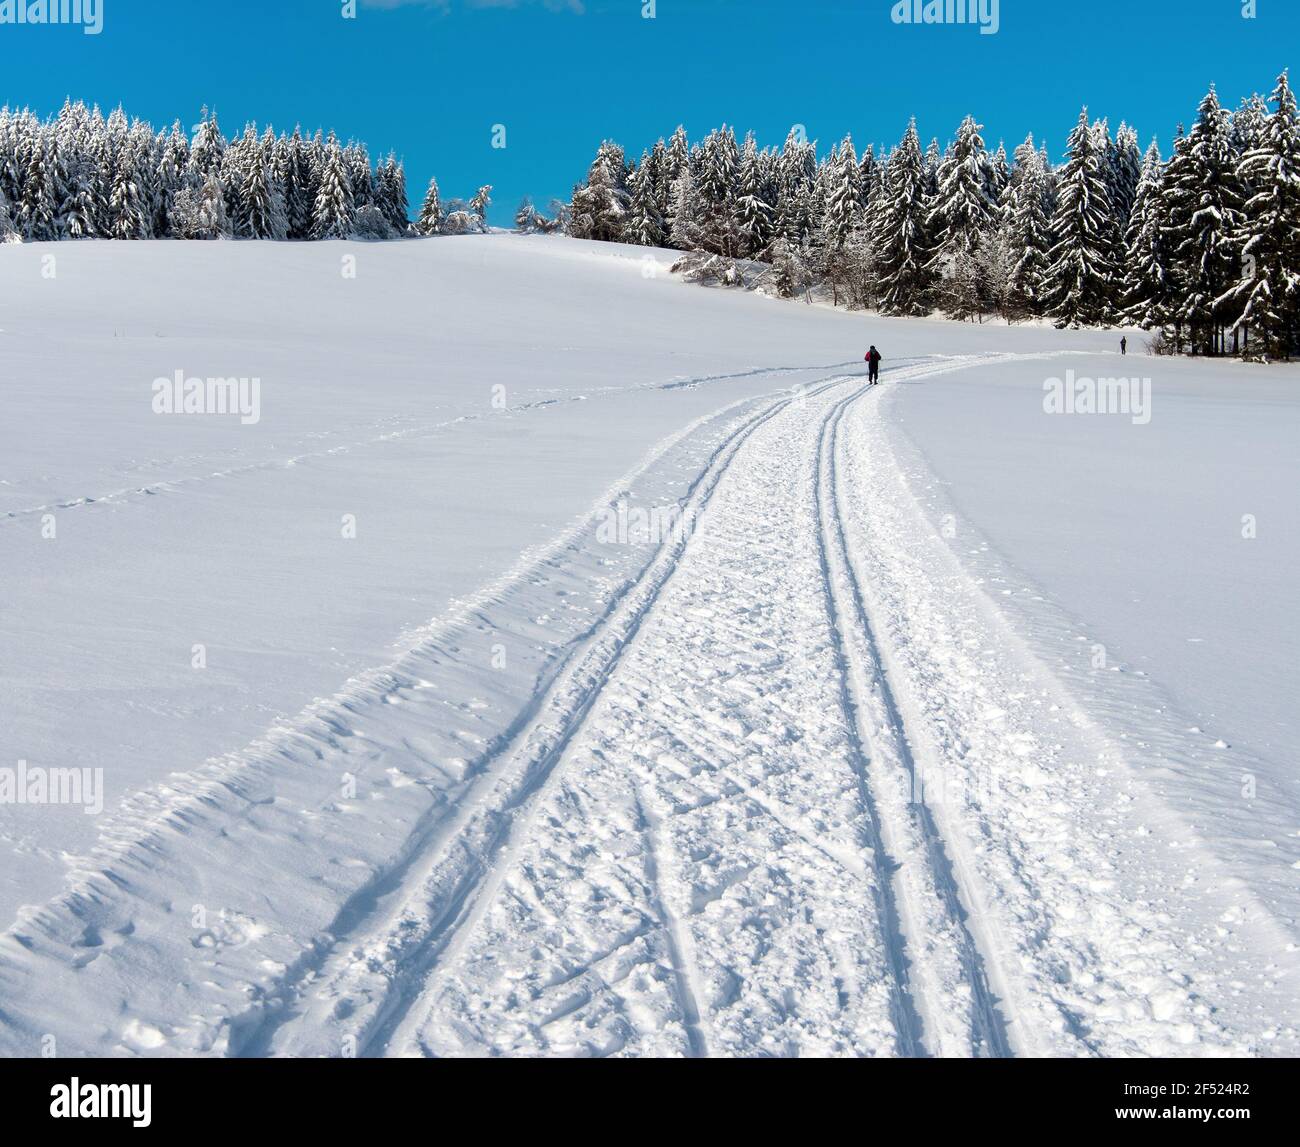 wintry landscape scenery with modified crosscountry skiing way Stock Photo